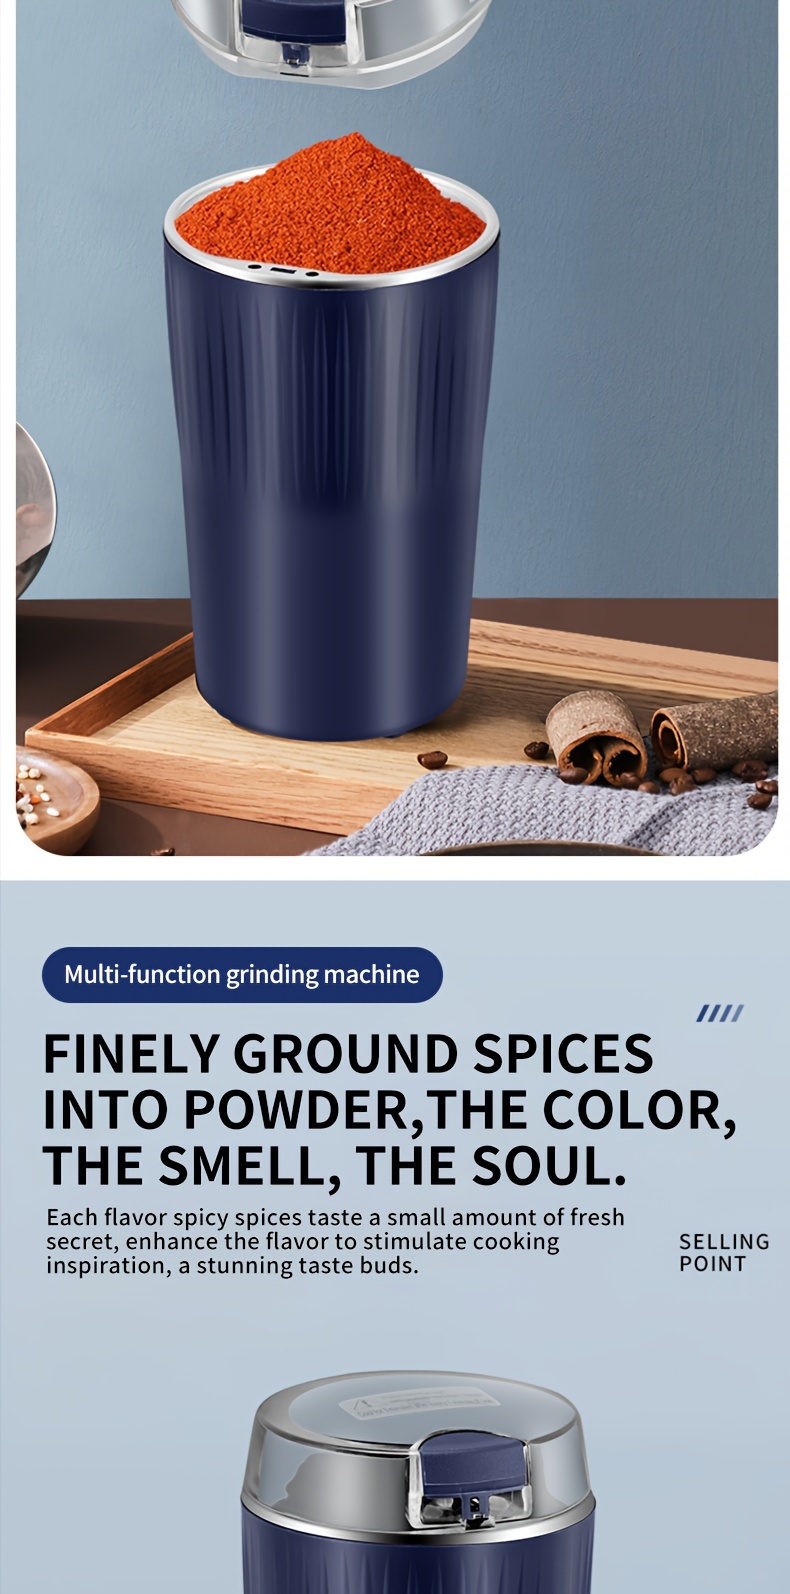 1pc 3 5oz electric coffee grinder with one touch push button control kitchen accessories for beans spices and more 8stainless steel blades quiet spice grinder us plug black blue details 11